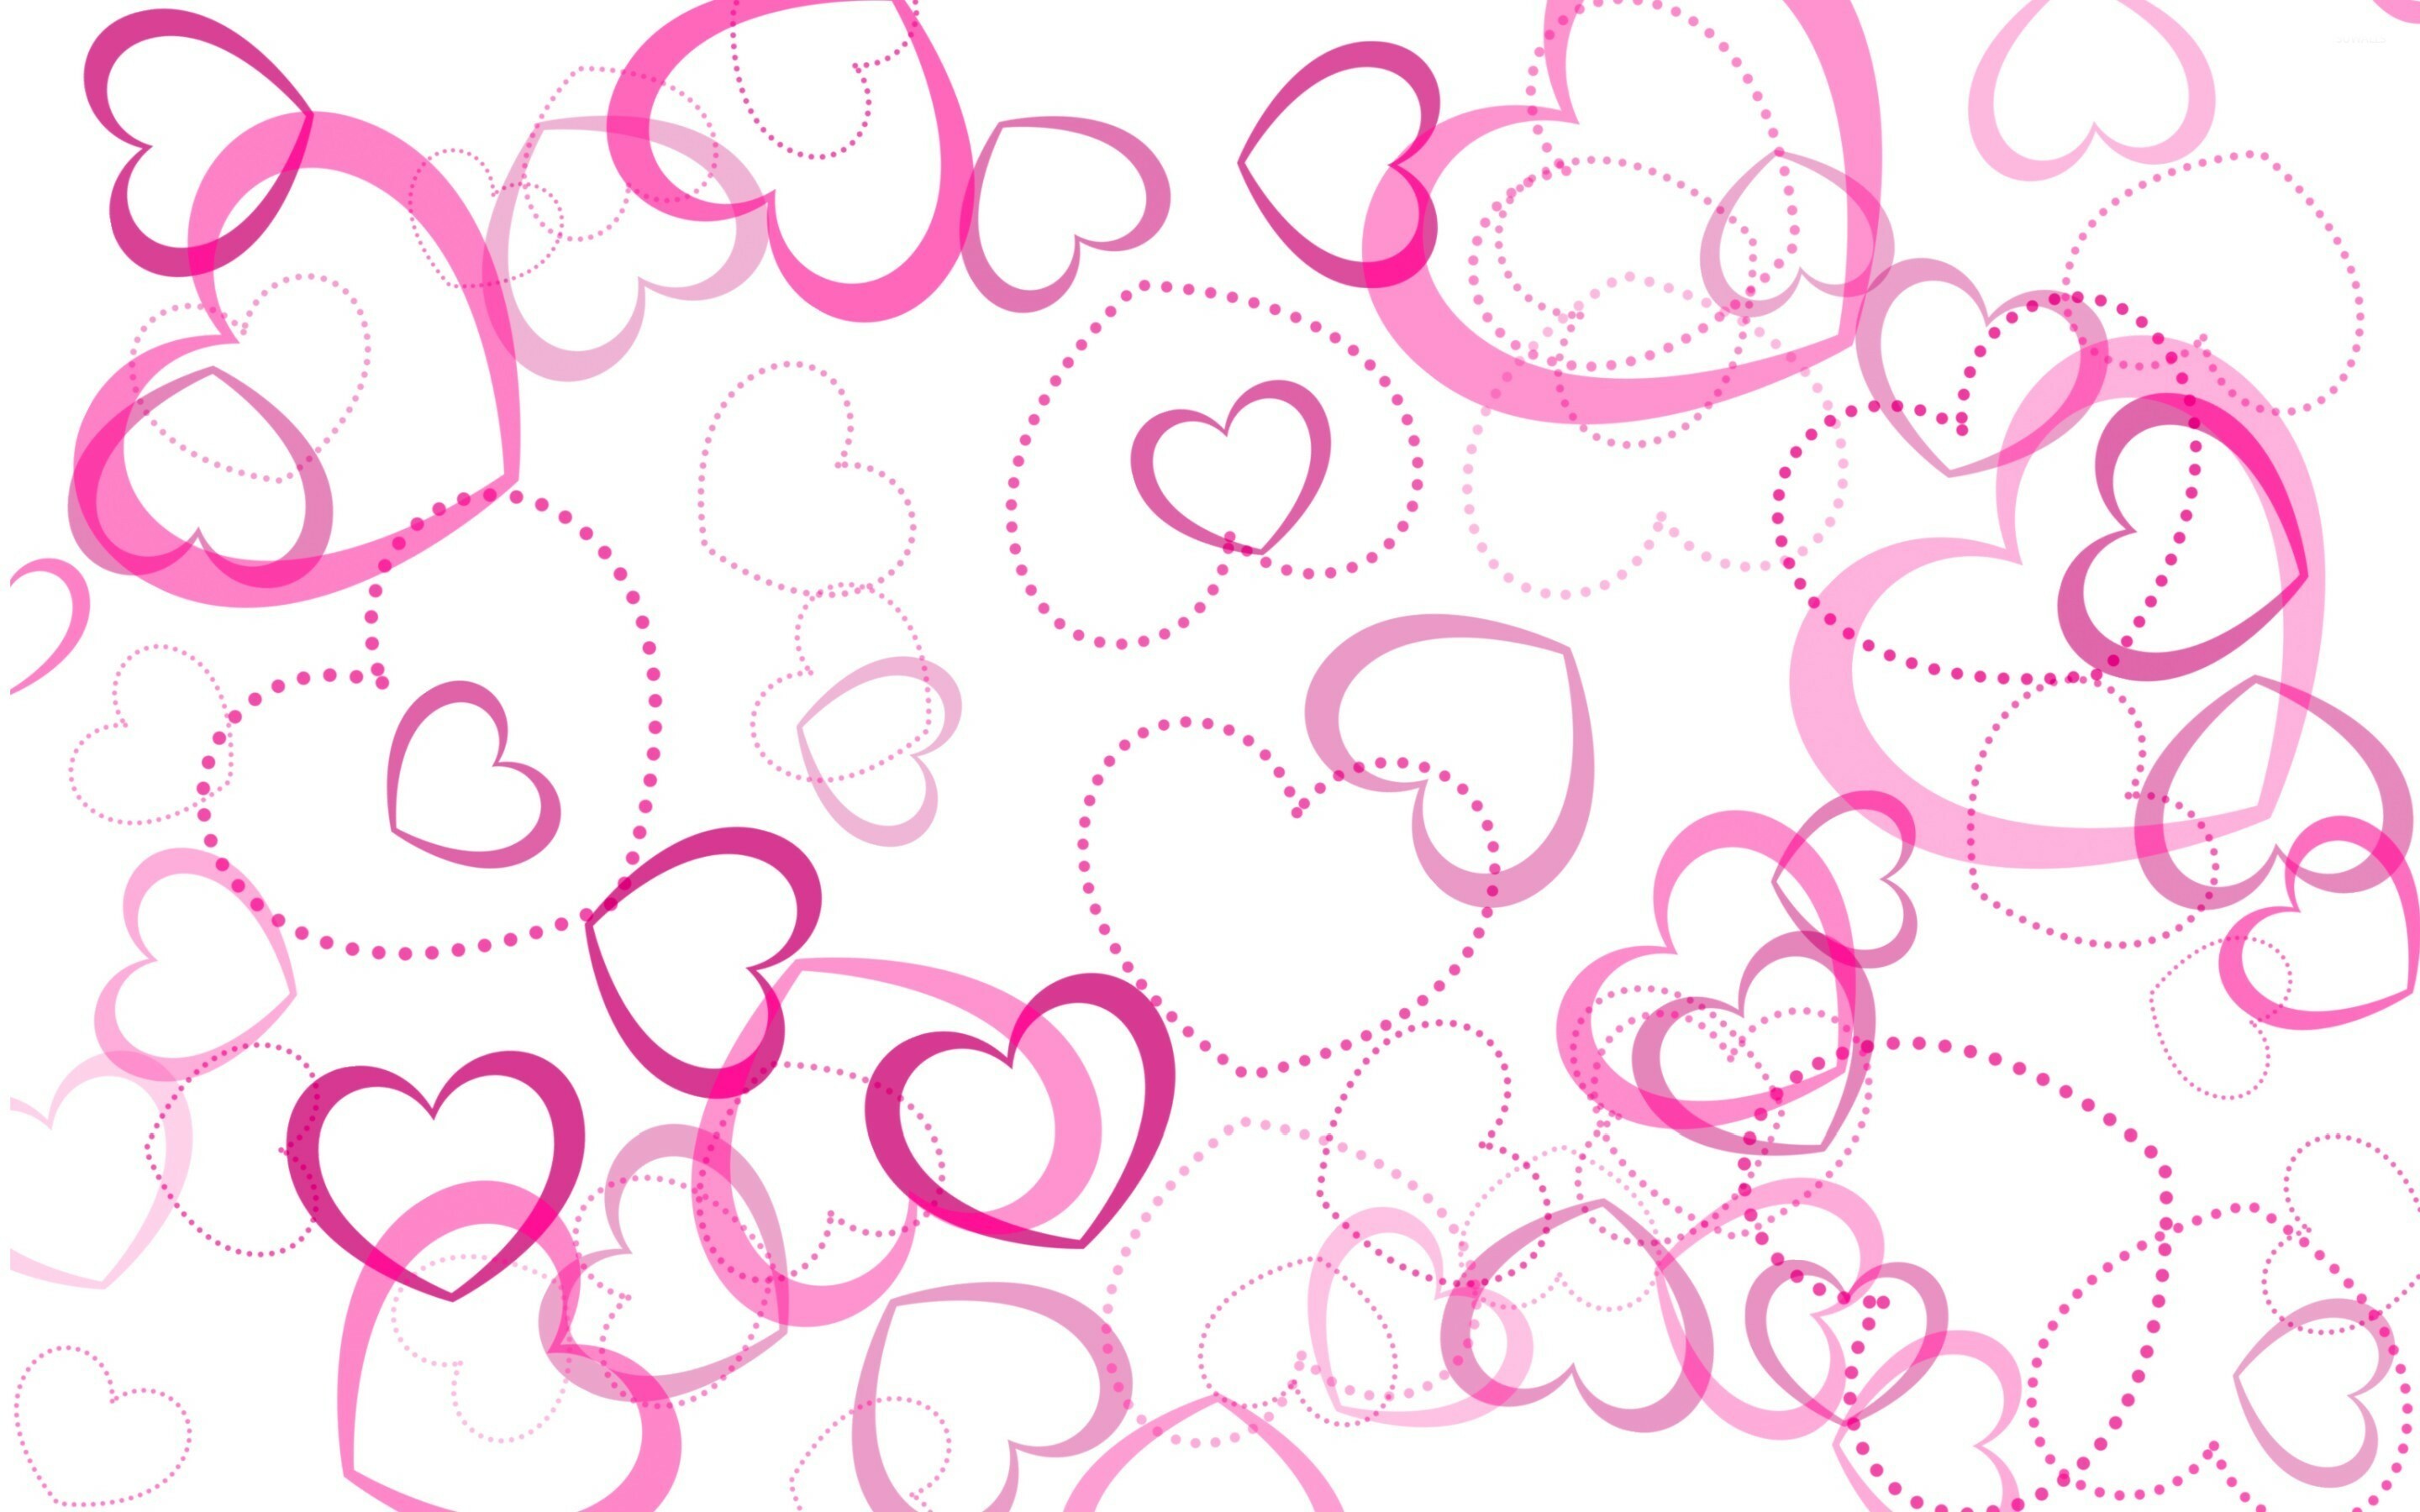 Heart: St. Valentine used the symbol when arranging secret marriages. 2880x1800 HD Wallpaper.